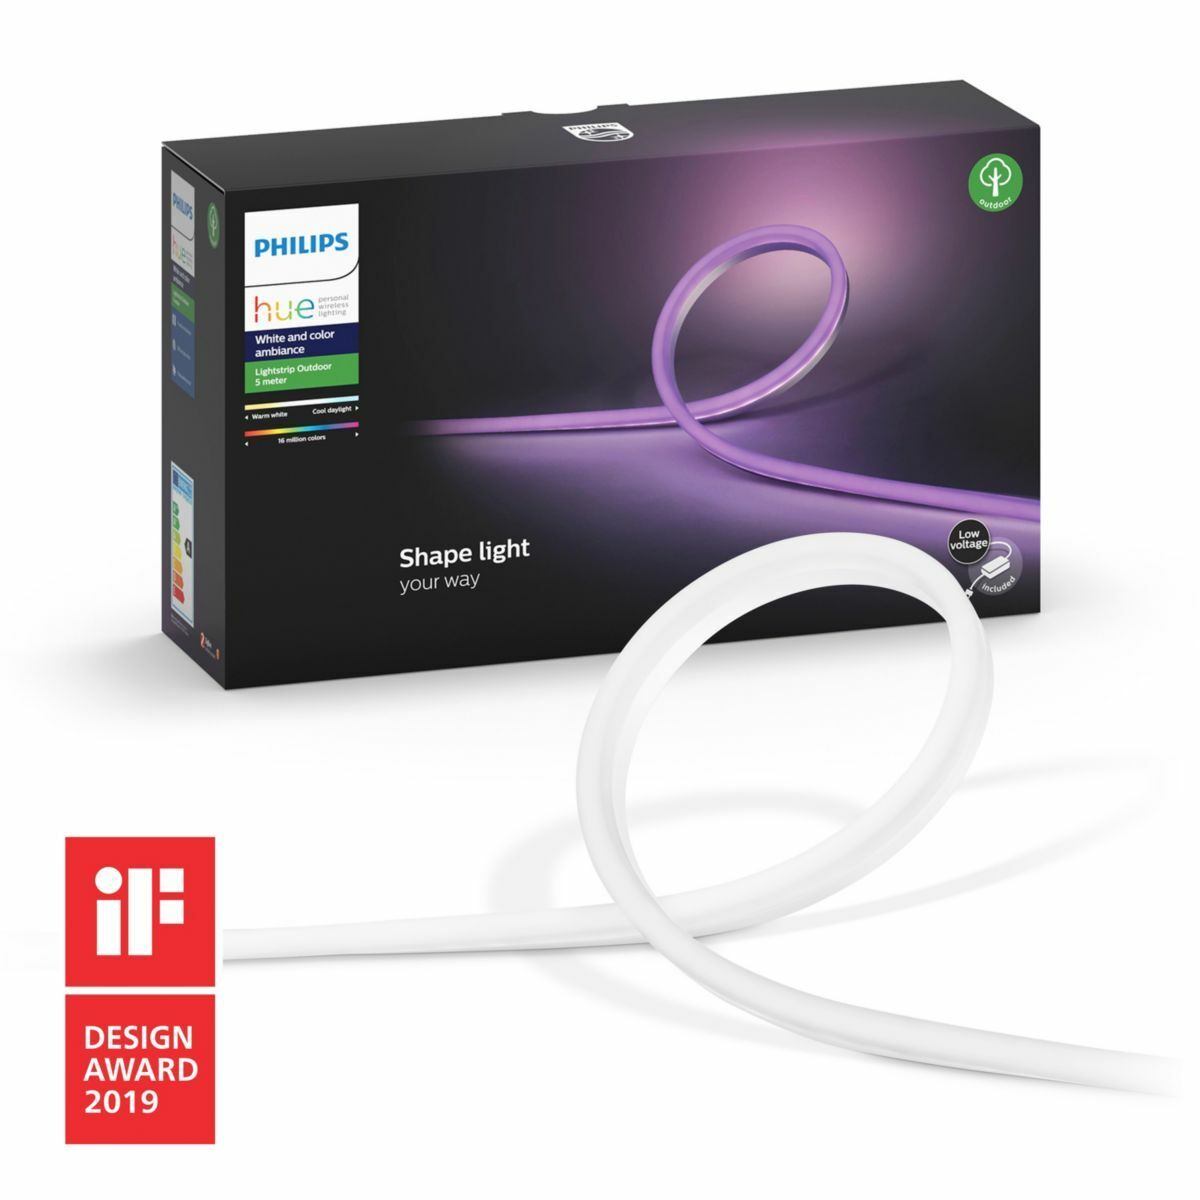 Philips HUE Cable 5m Outdoor Ligth Strip Base kit - Store 974 | ستور ٩٧٤